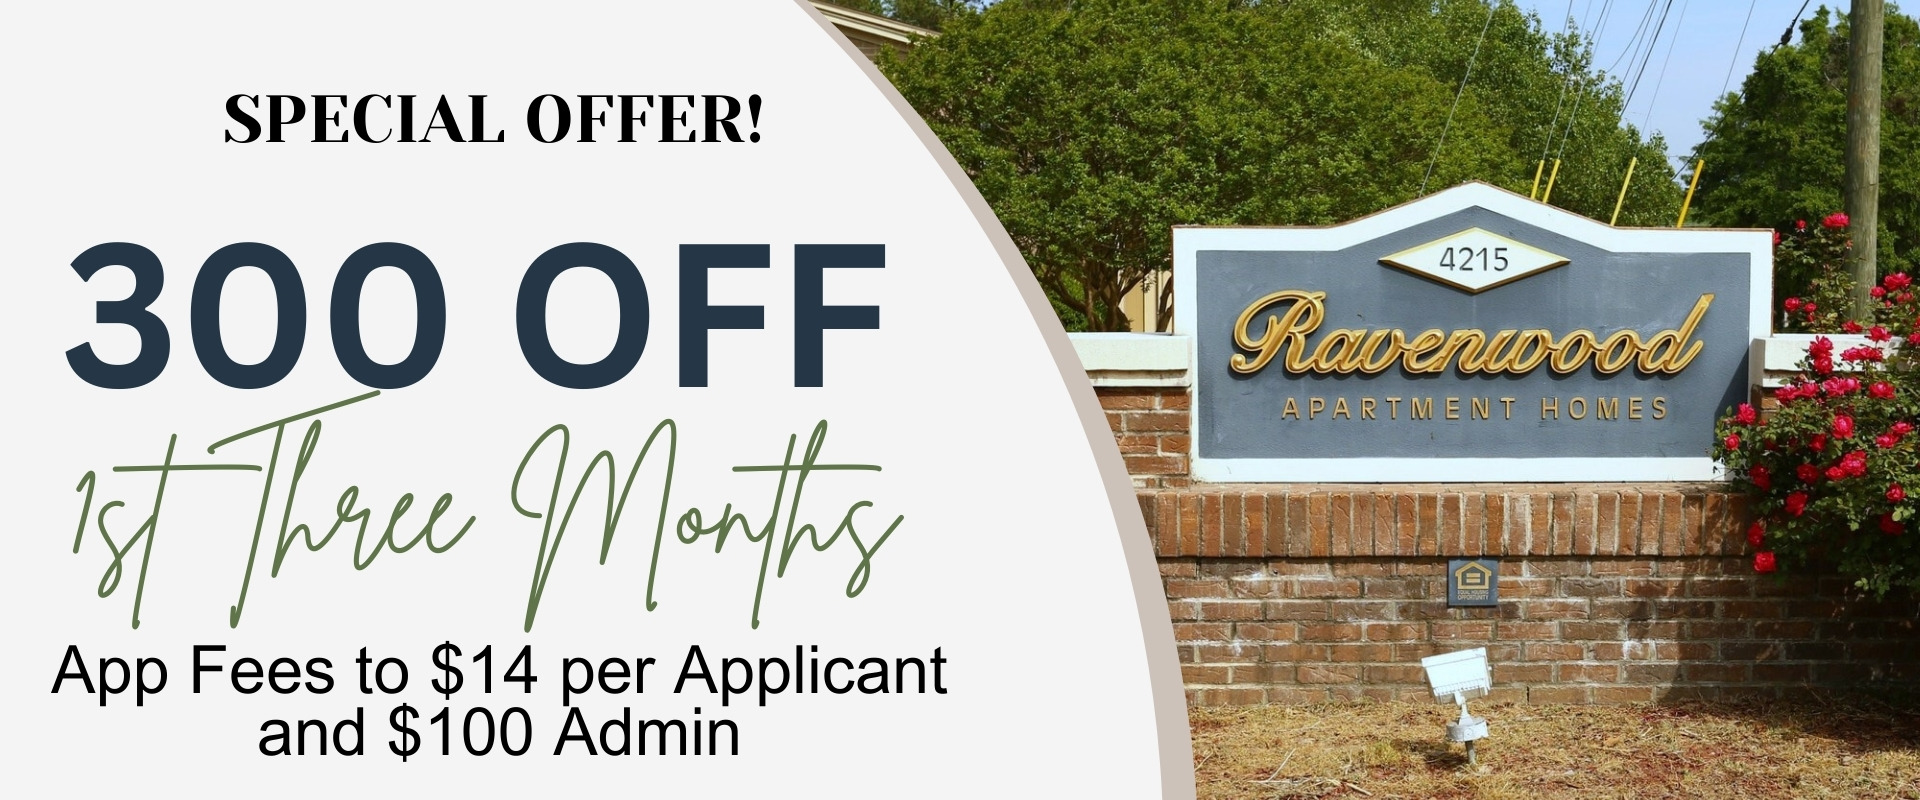 $300 off 1st 3 months, App fees to $14 per applicant and $100 admin